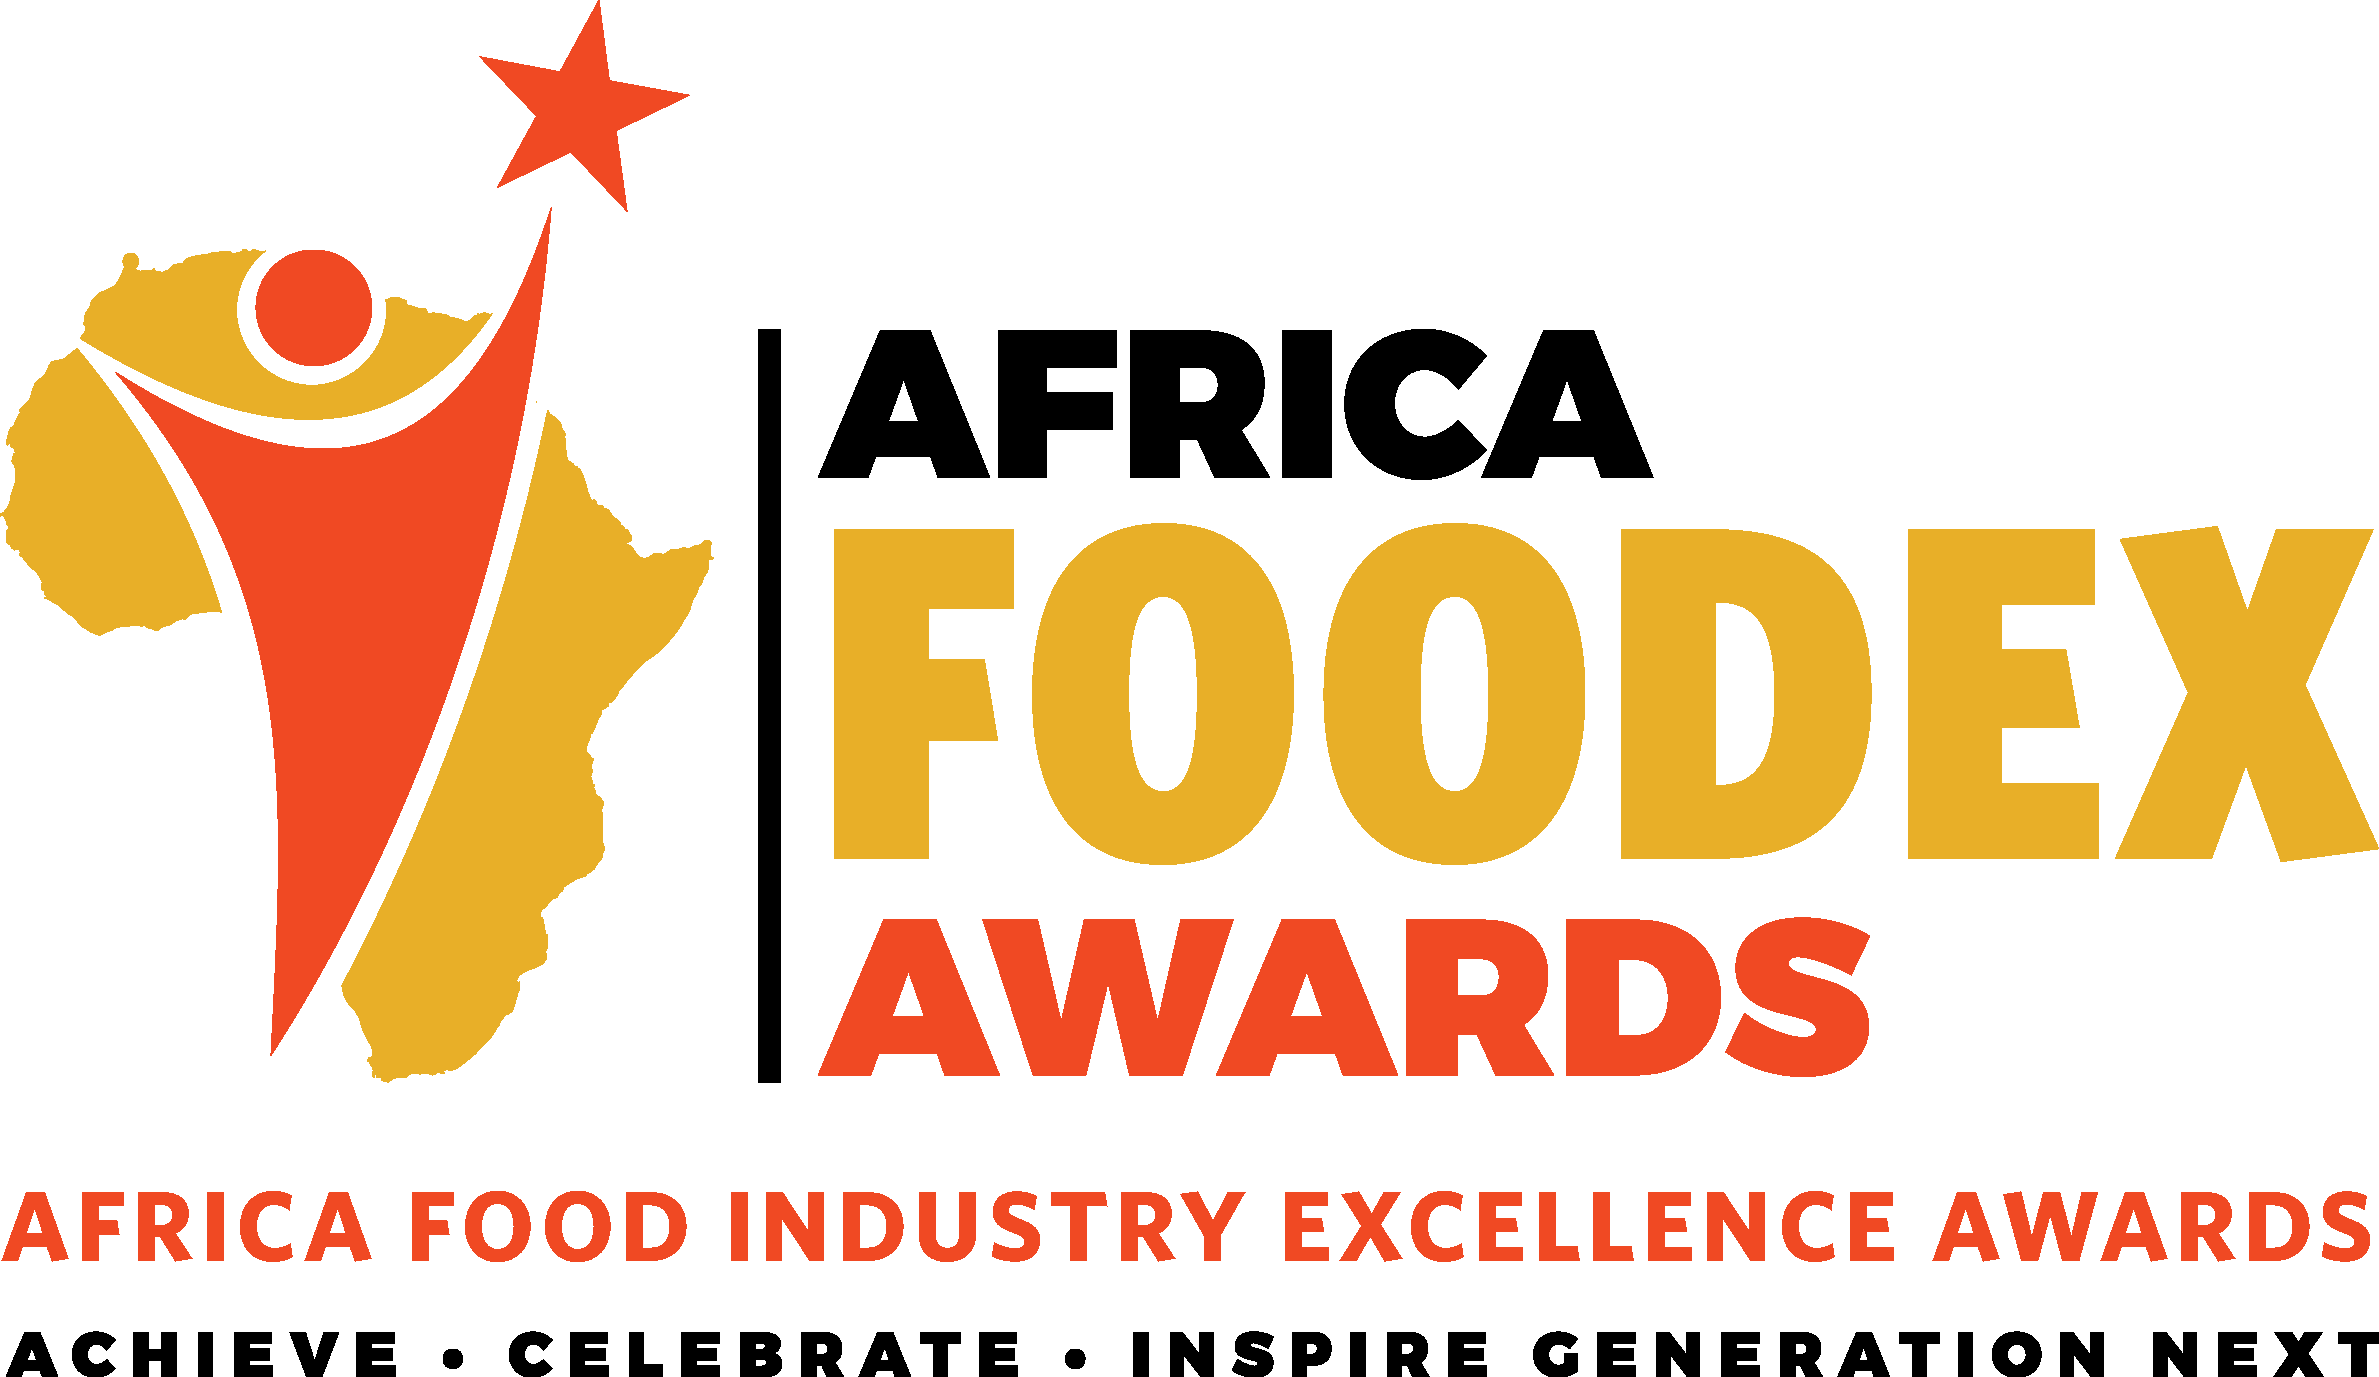 Submission of entries announced for the Africa FOODEX Awards 2019